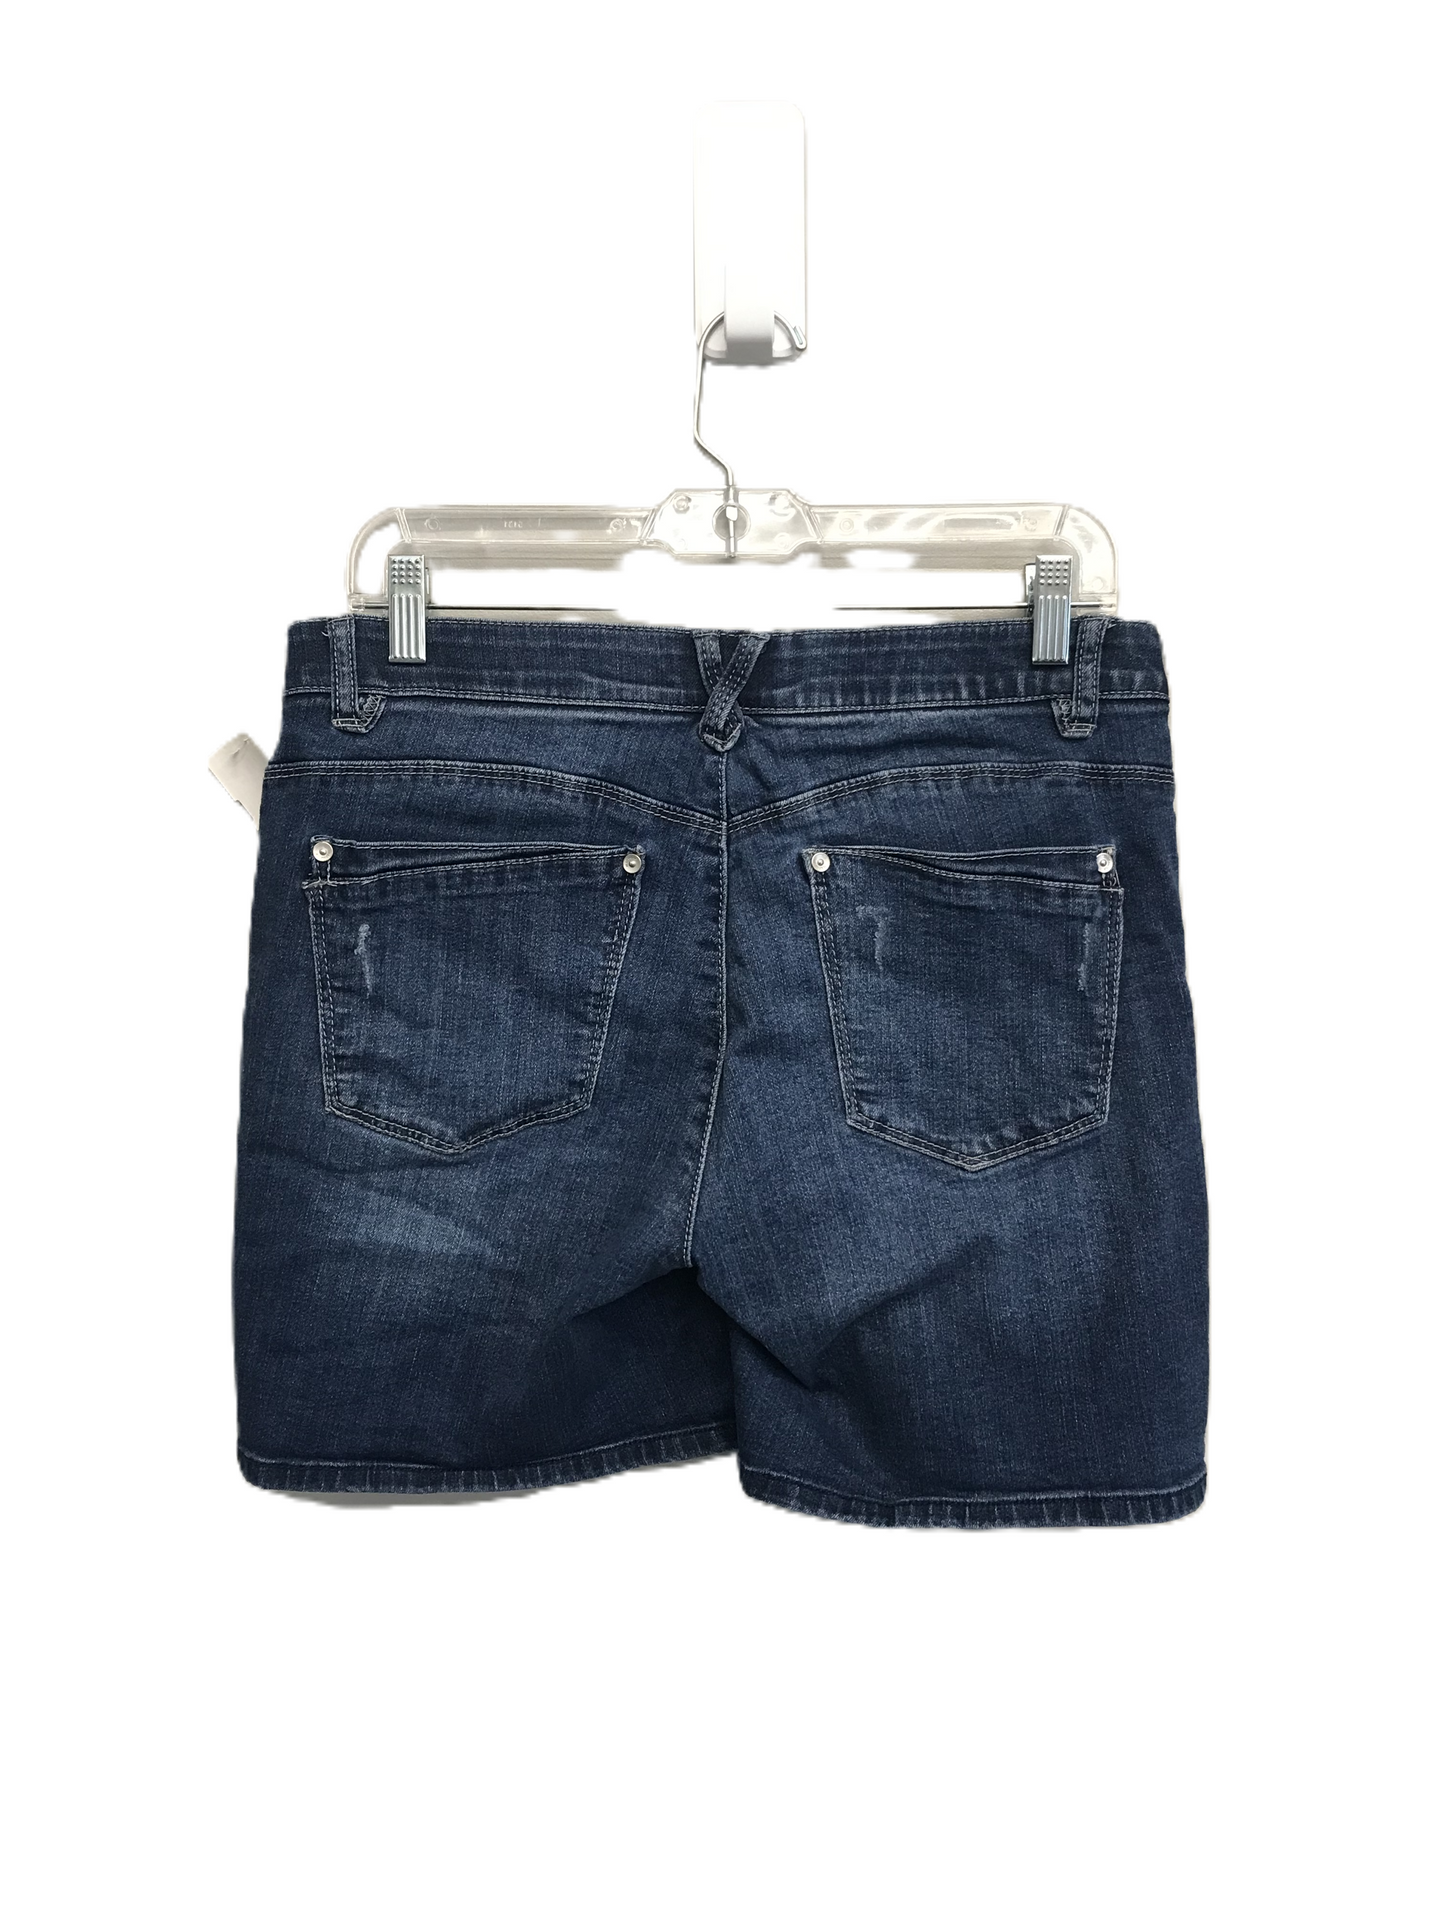 Blue Denim Shorts By Mac And Me Size: 10